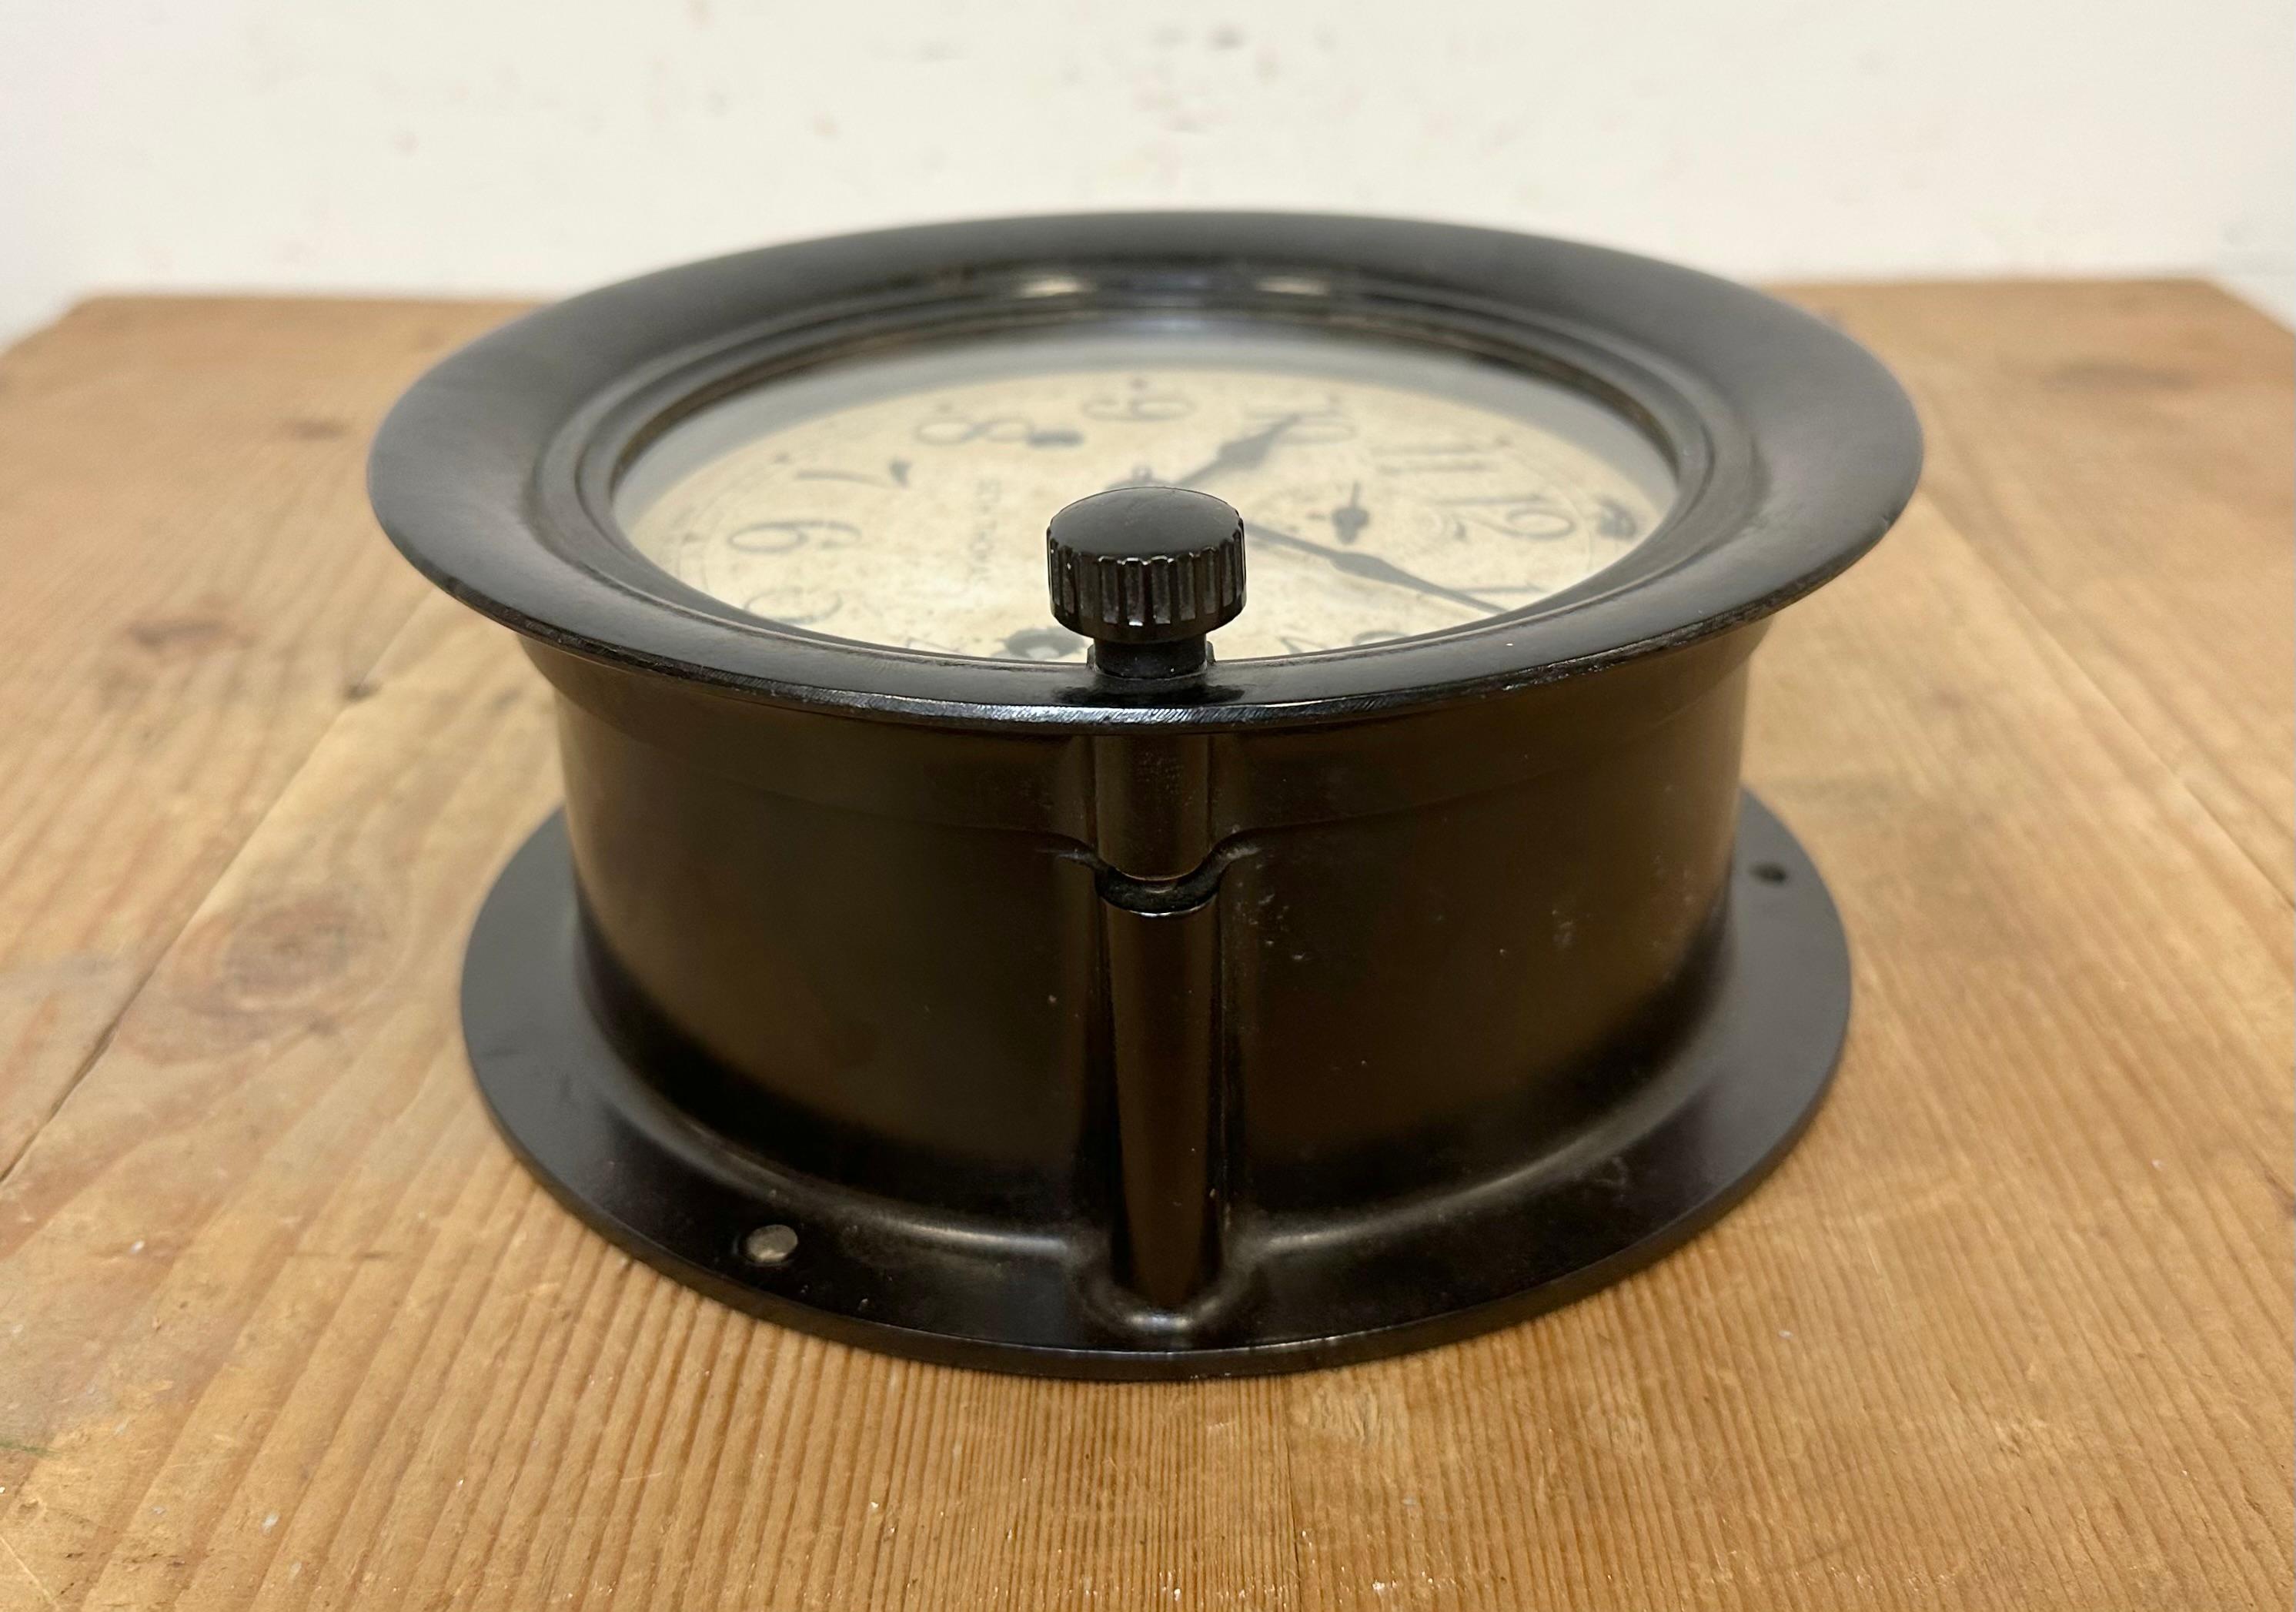  Vintage Mechanical Bakelite Maritime Wall Clock from Seth Thomas, 1950s For Sale 3